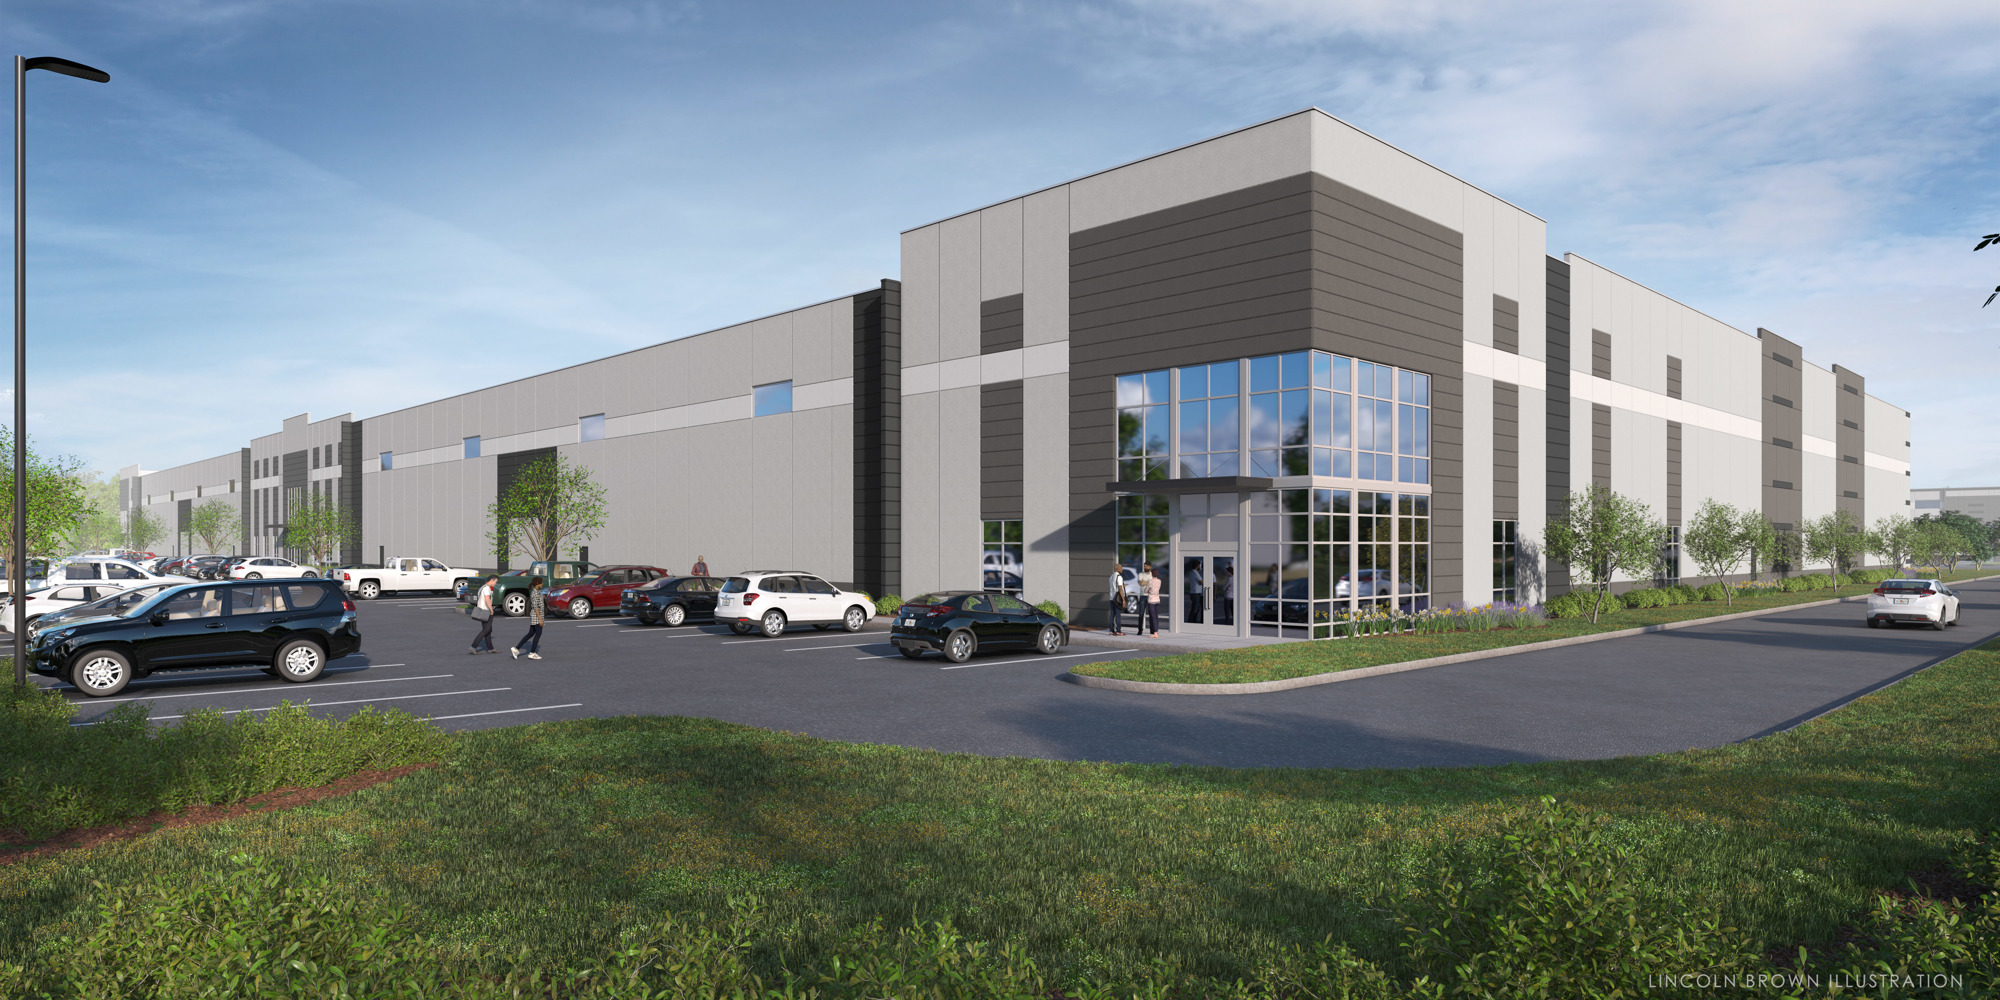 Freebird Commerce Center is one of many speculative warehouse projects in development in Jacksonville.